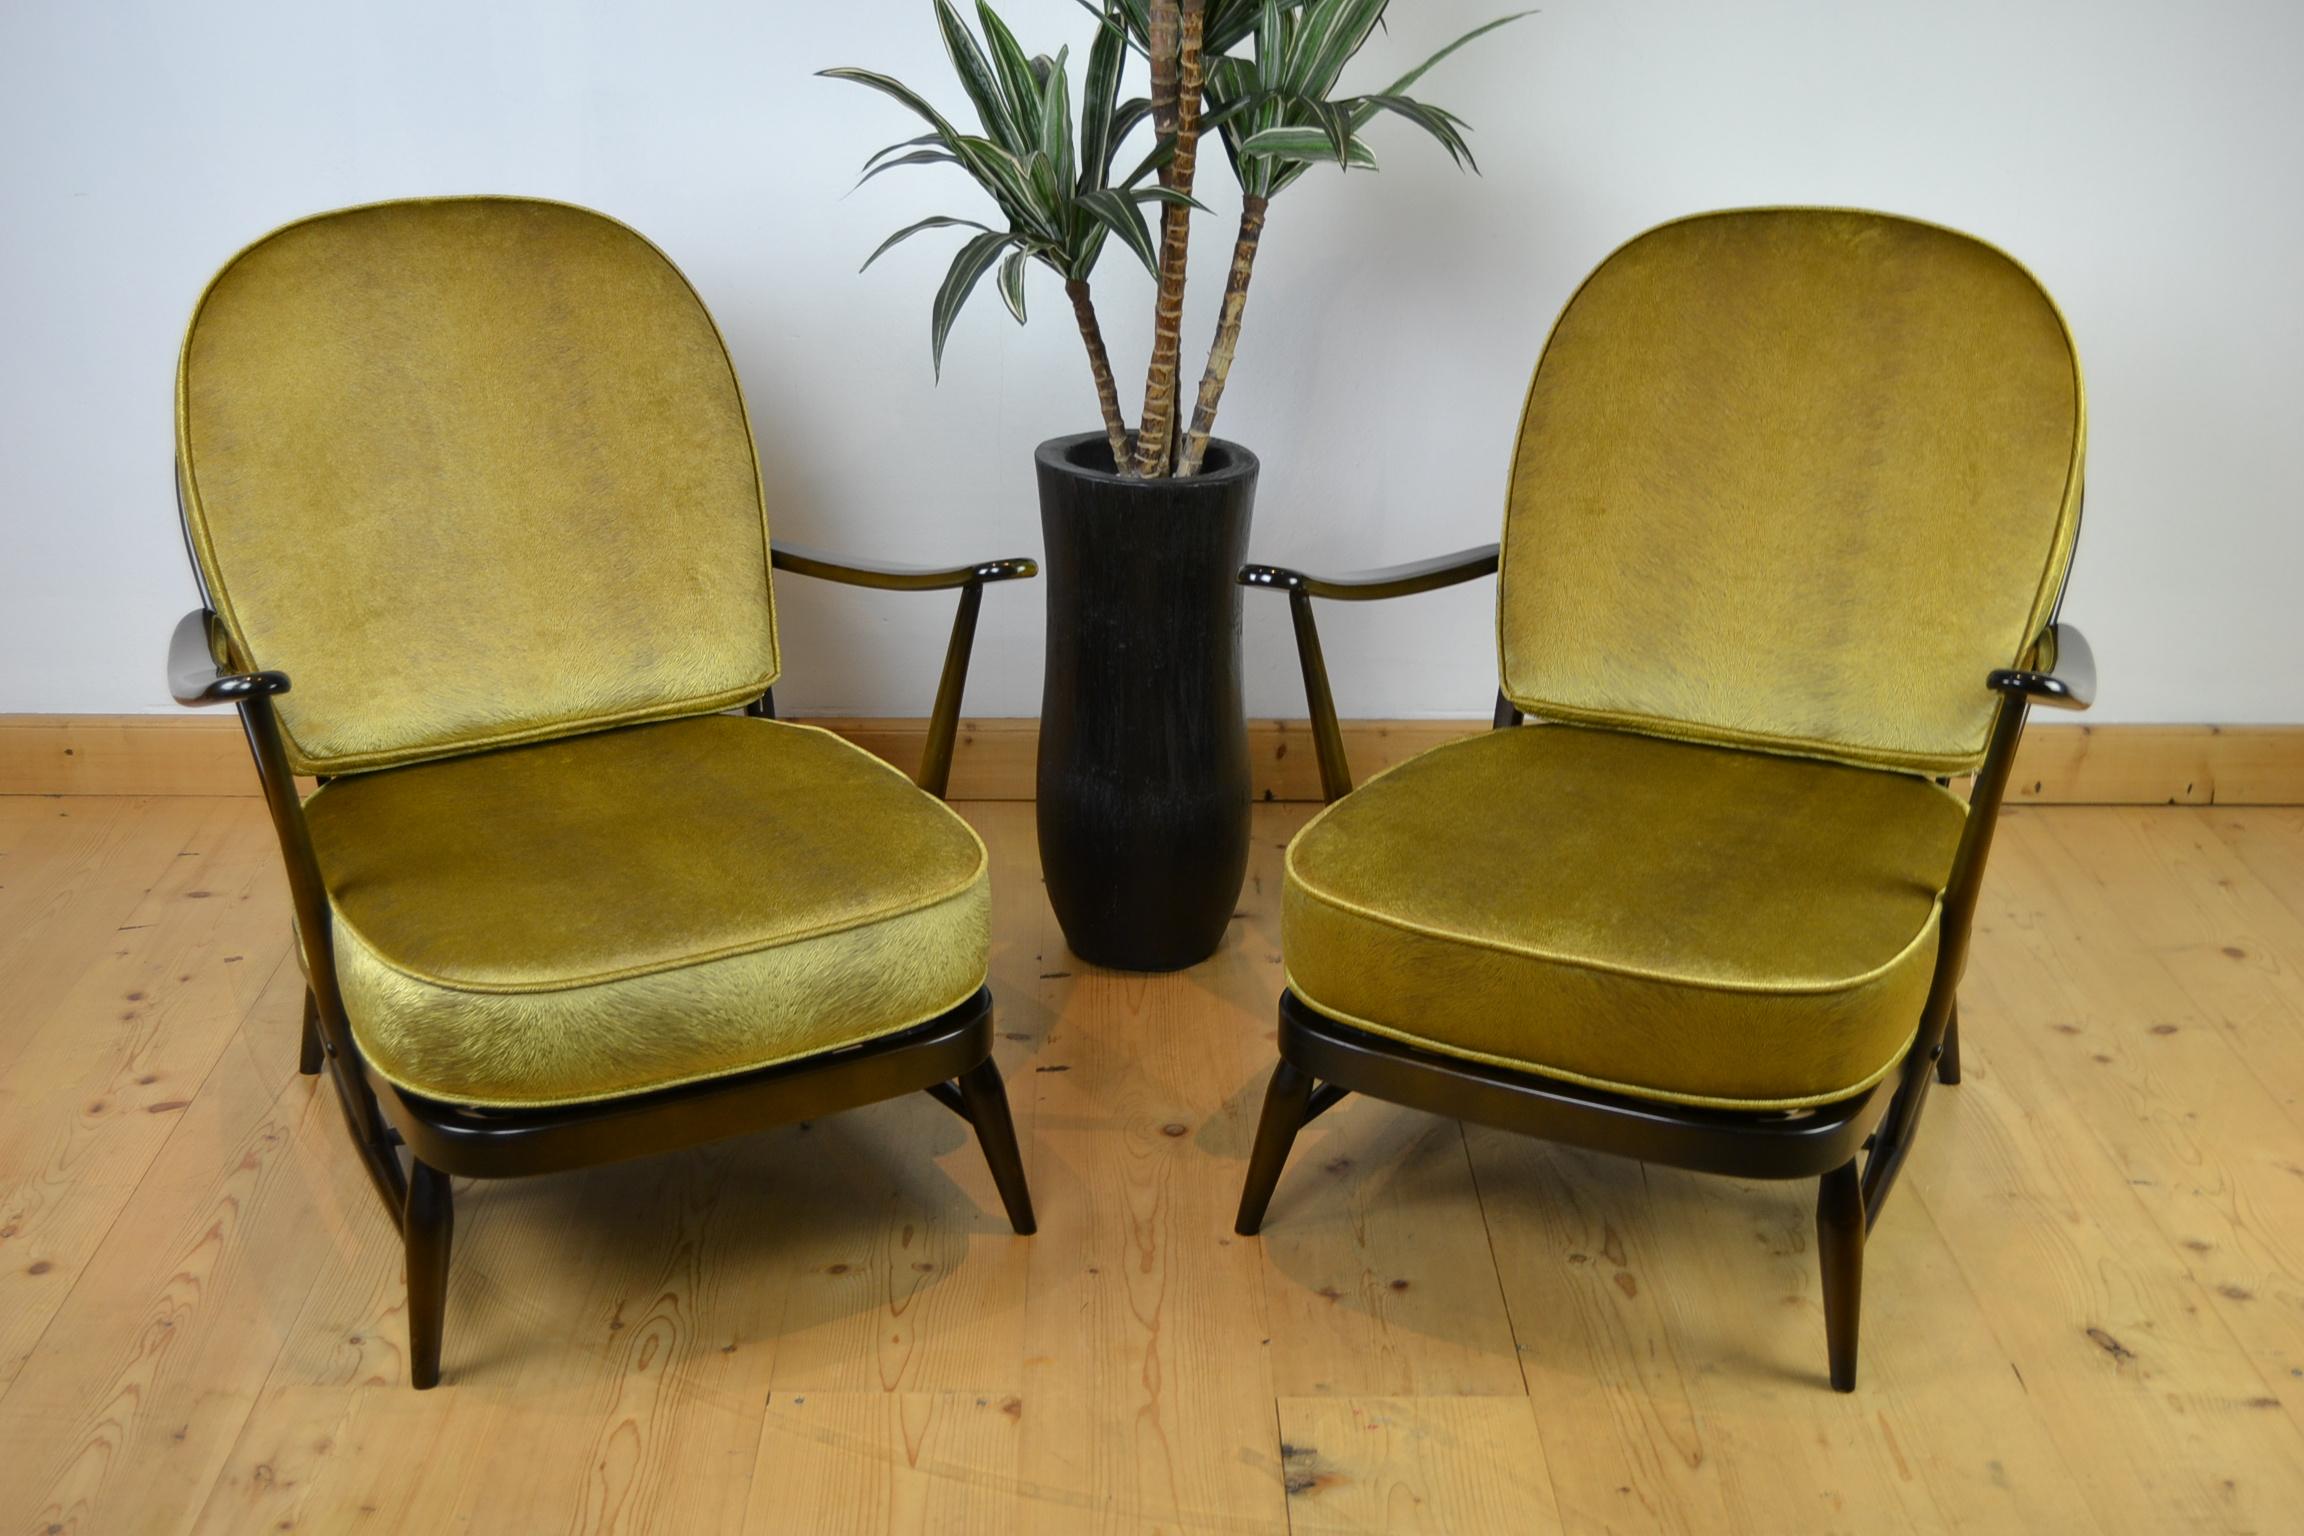 1970s set of Ercol Windsor Range armchairs .
These vintage armchairs with round stick backs are made of dark solid elm. 
Both still have their label under the seat, and are dated 1979. 

They got new cushions, made by a